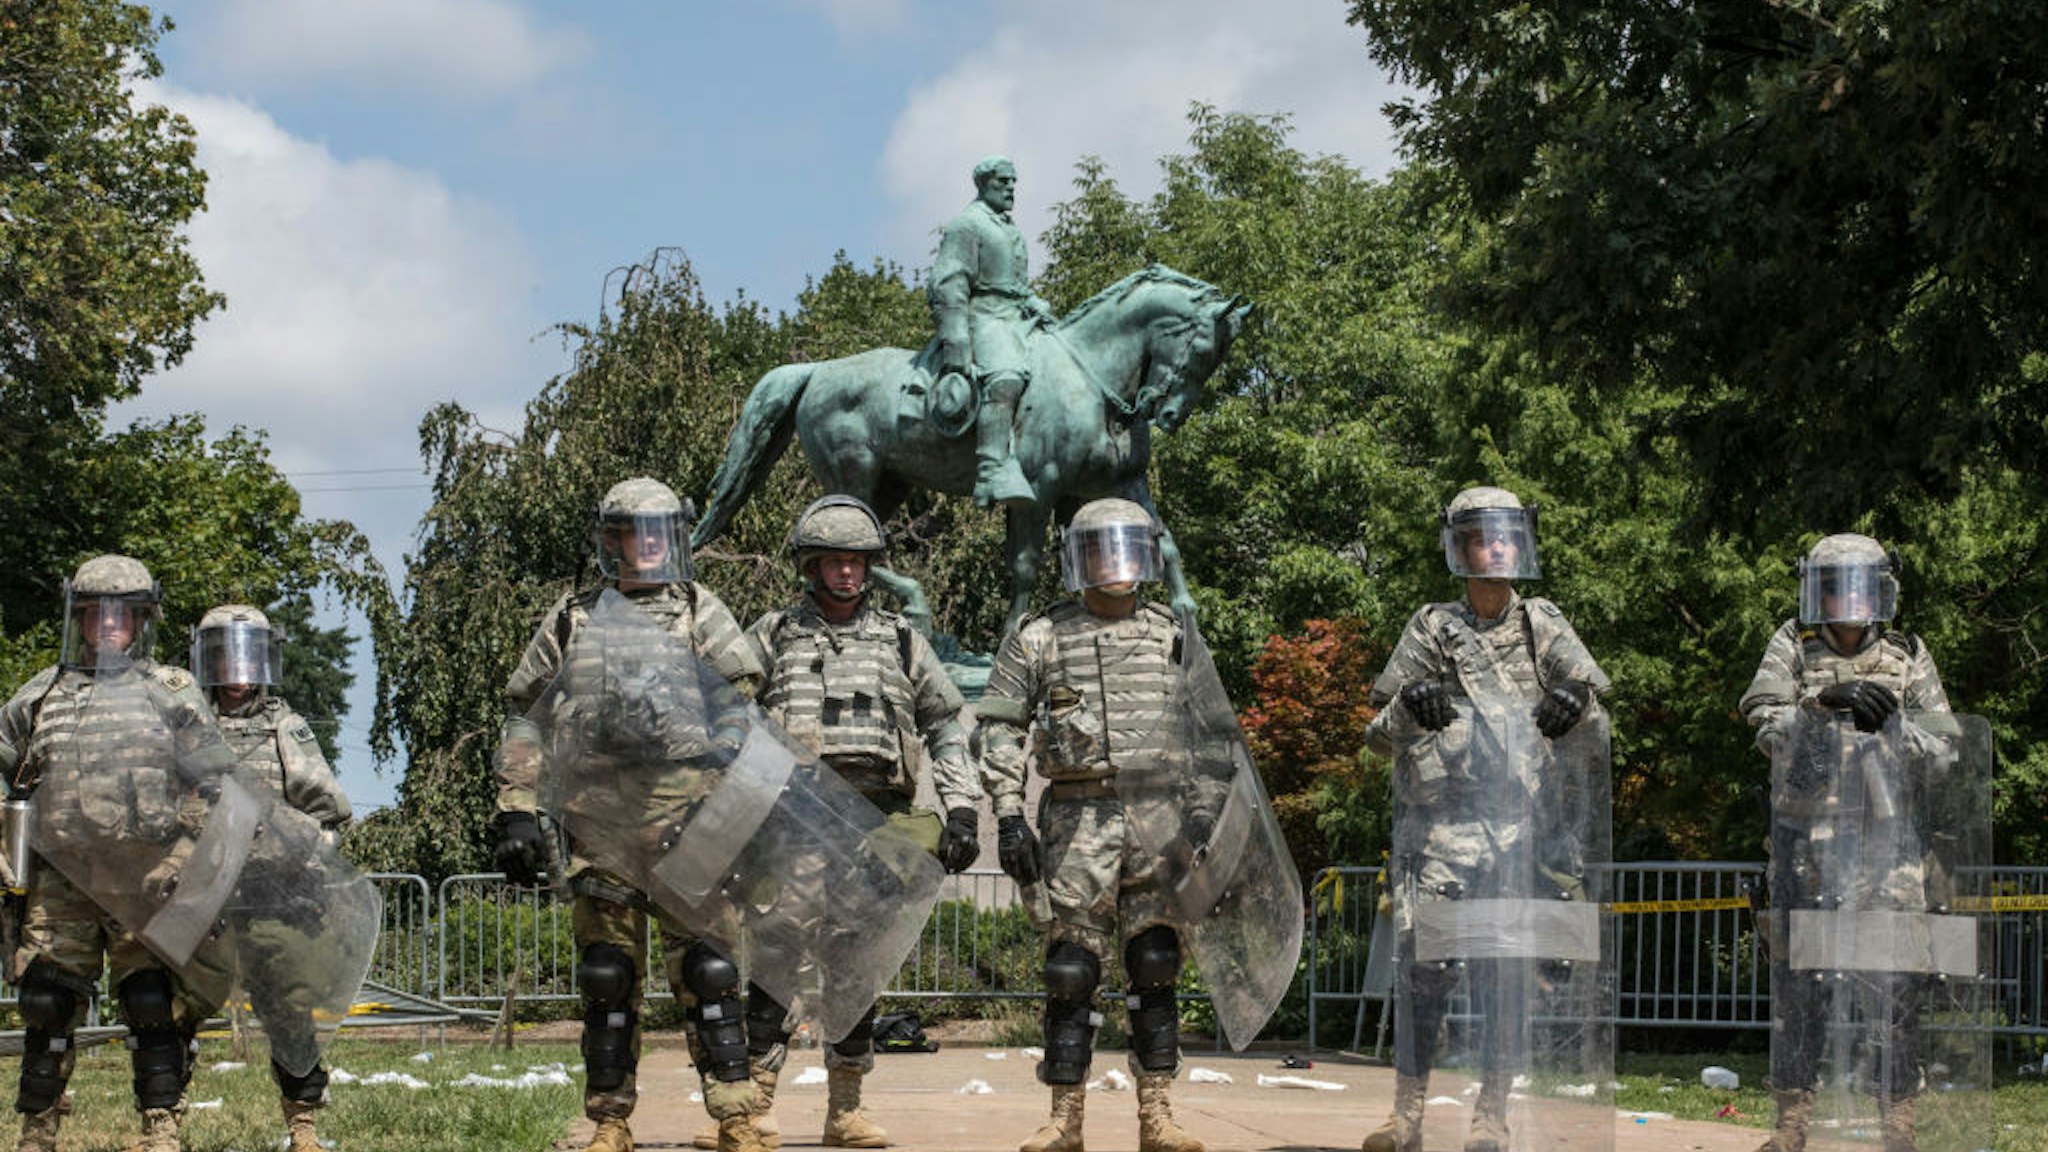 National Guard take over Emancipation Park as the Unite the Rally is shut down and declared an unlawful gathering in Charlottesville,Virginia, August 12, 2017.